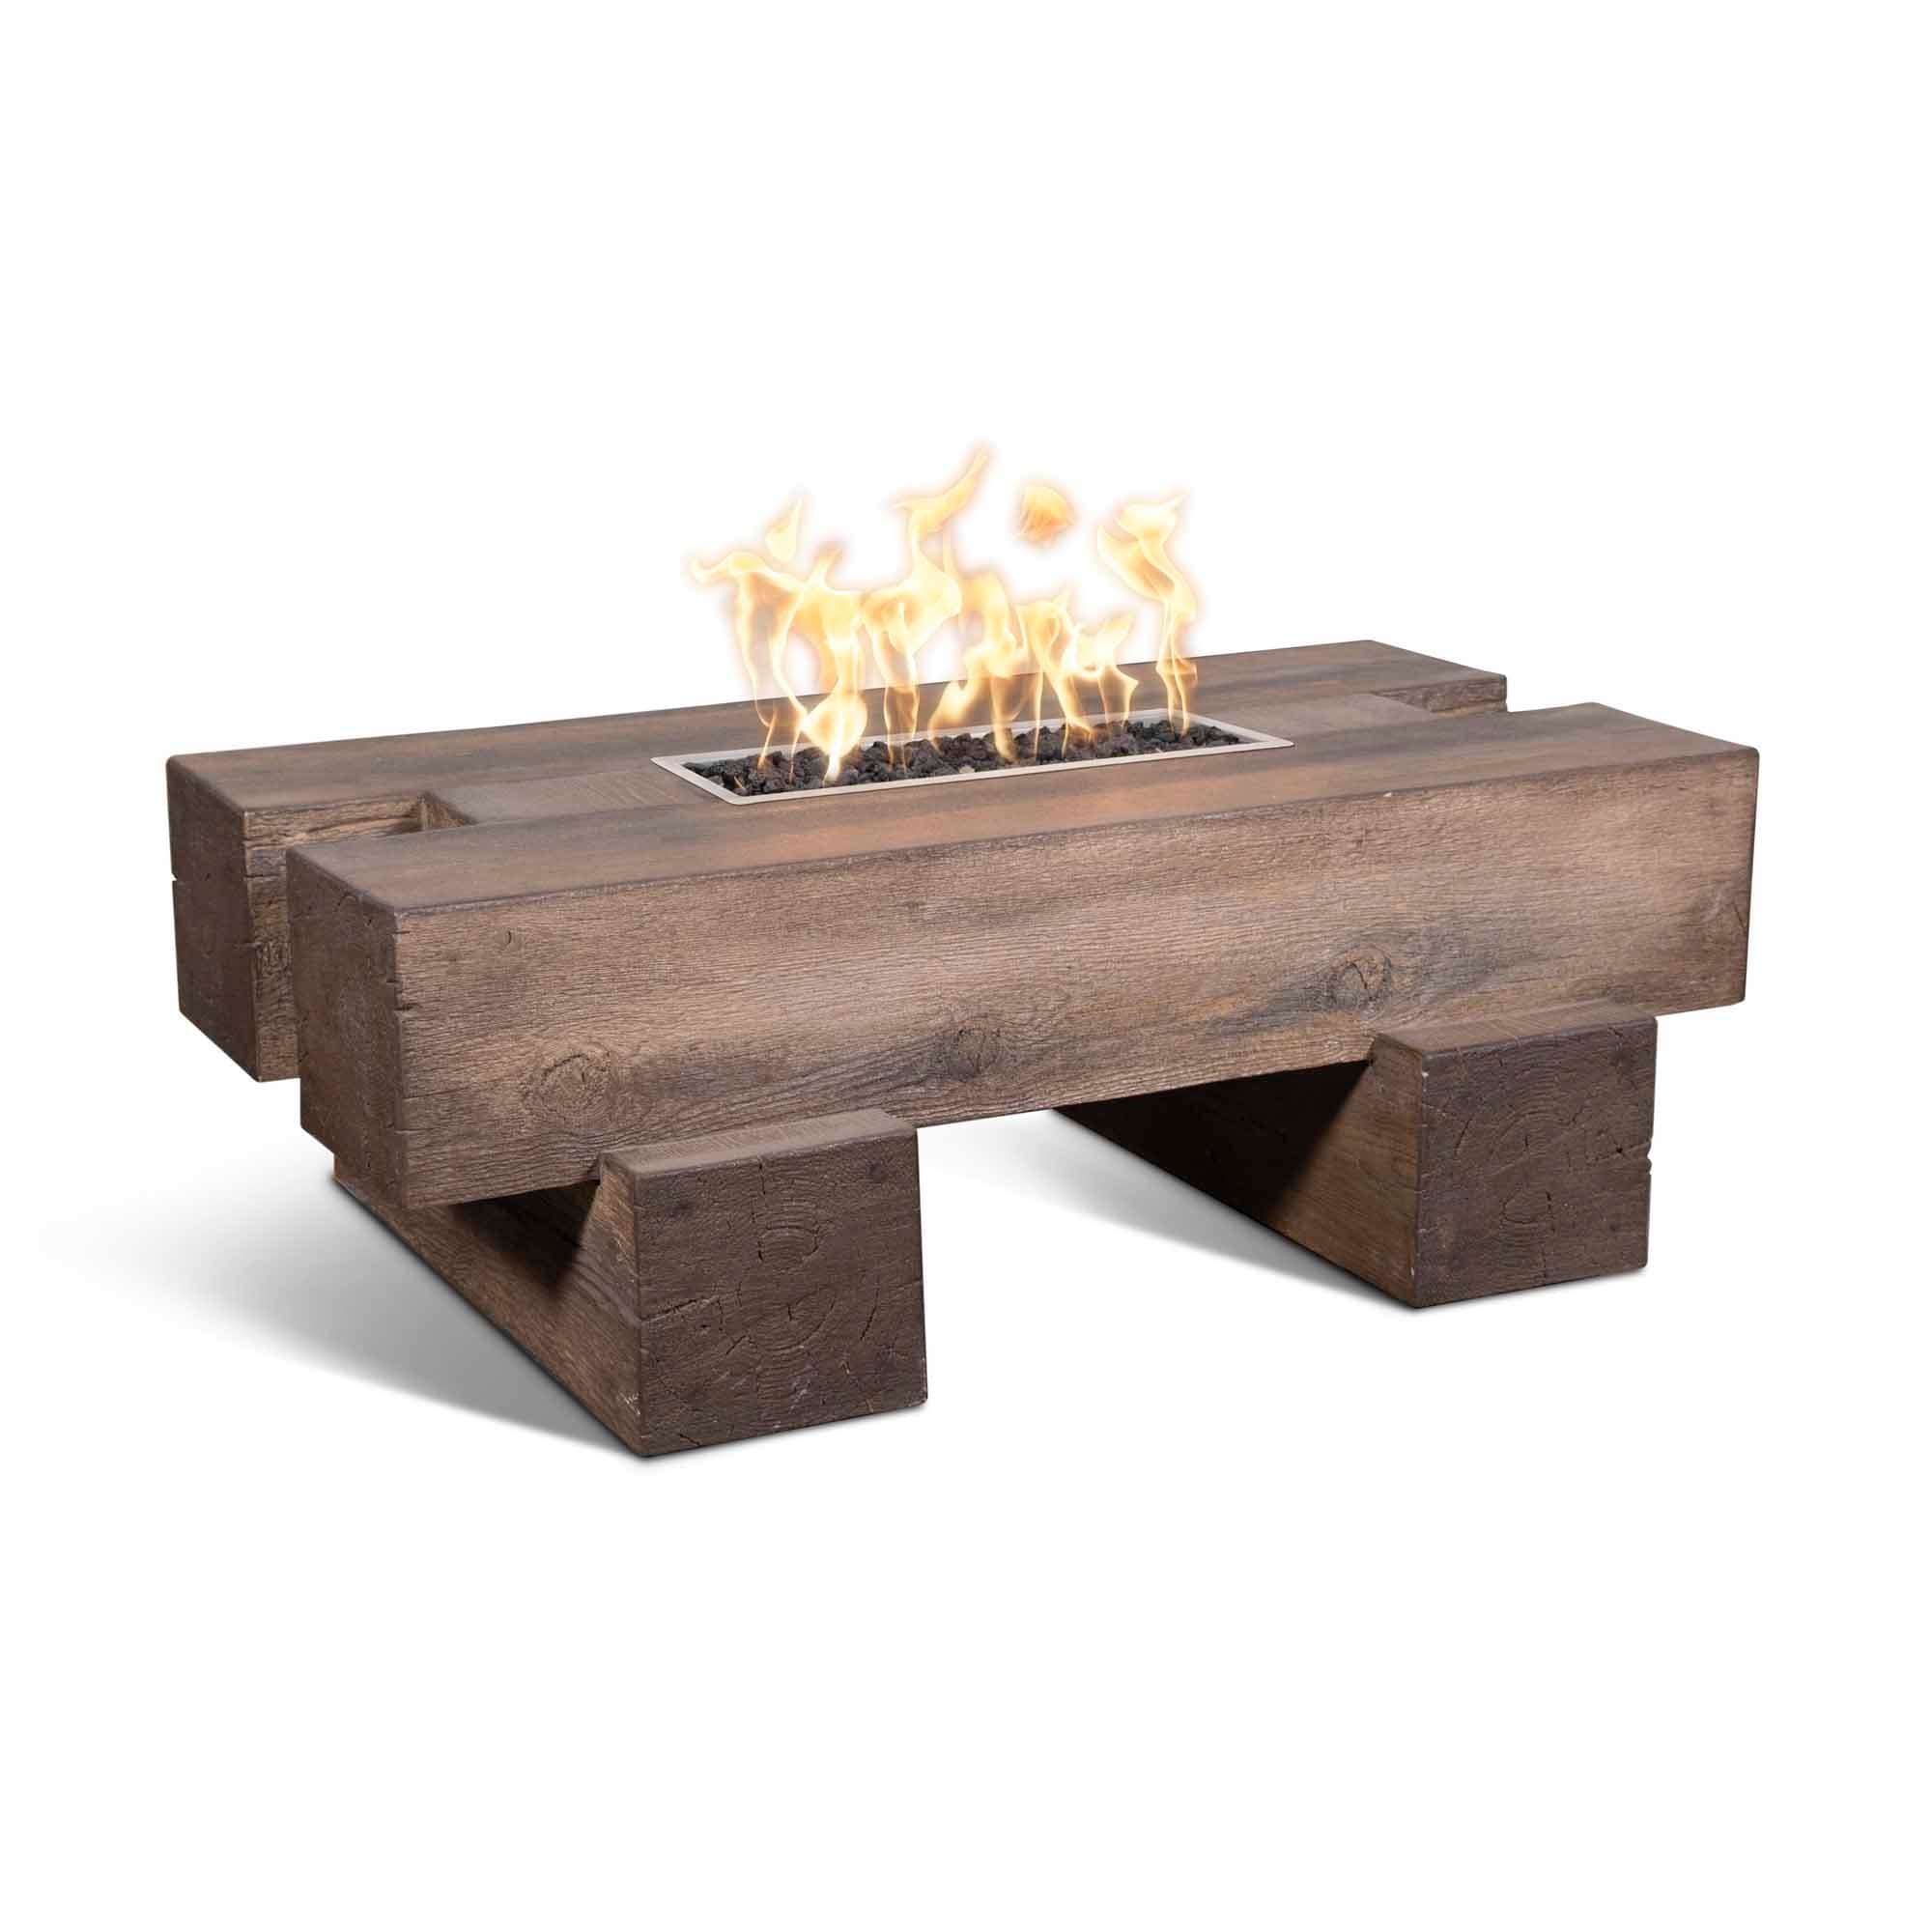 The Outdoor Plus Fire Pit 48" / Match Lit with Flame Sense System The Outdoor Plus Palo Fire Pit | Wood Grain OPT-PAL48FSML